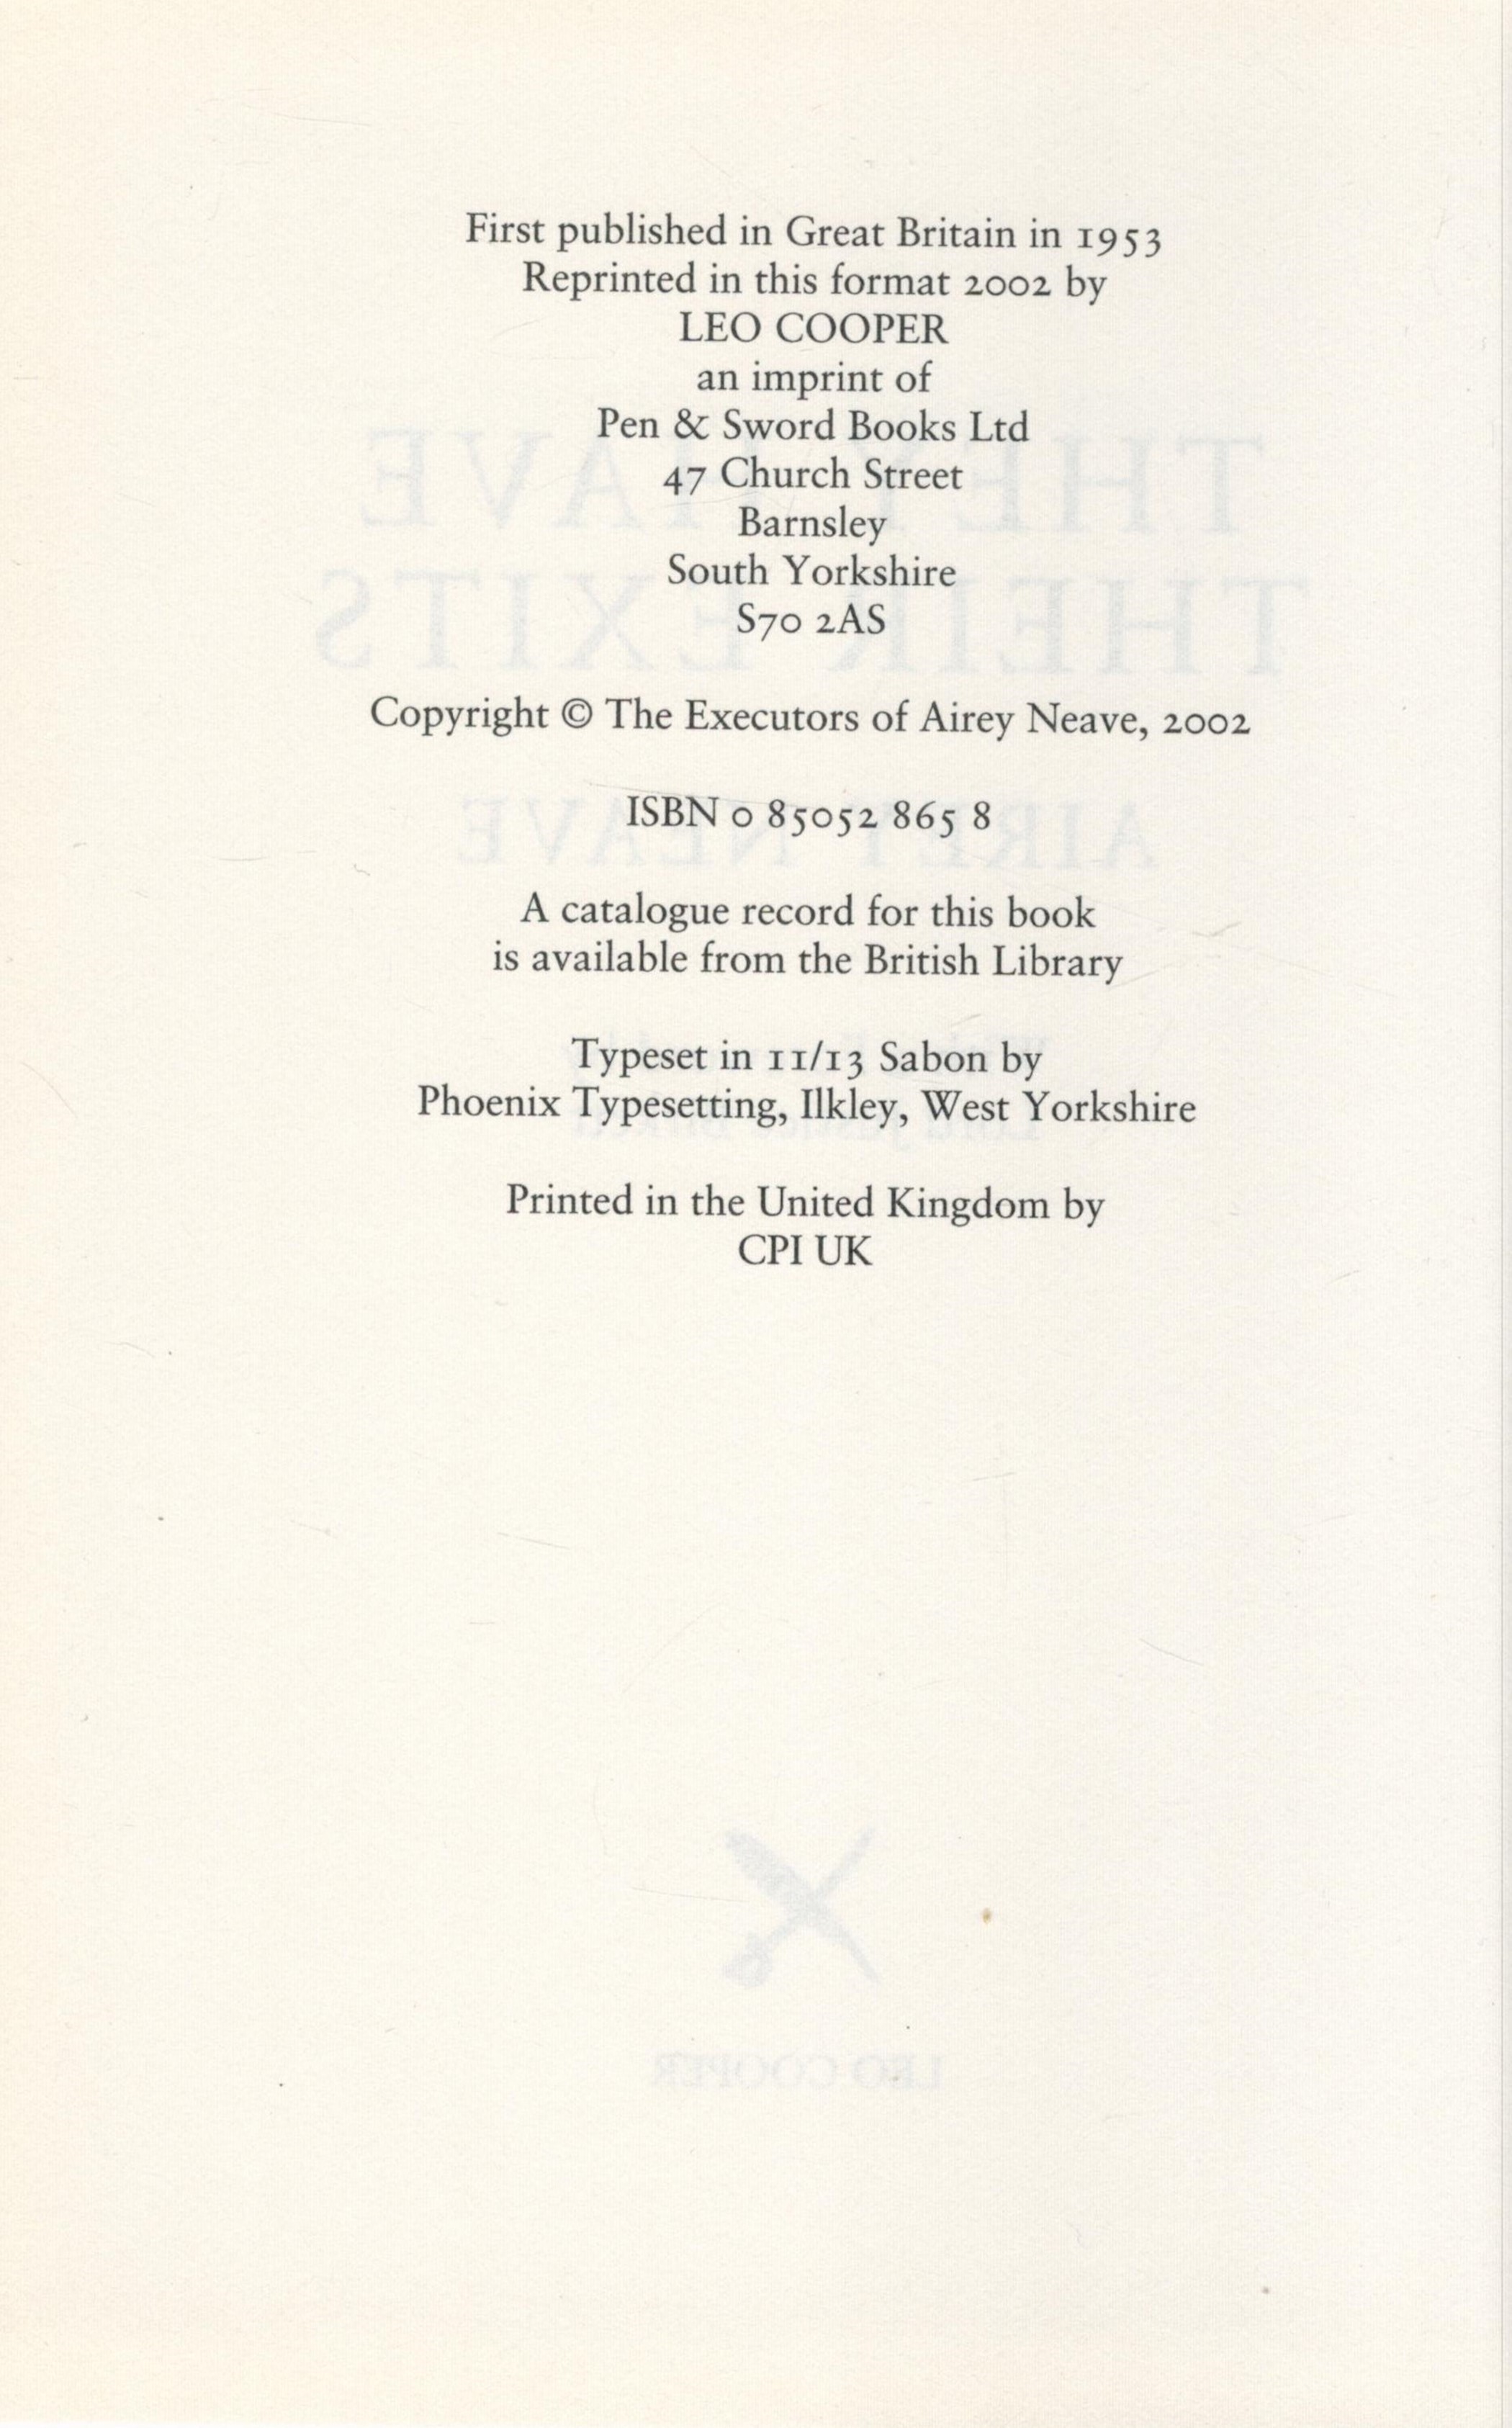 They Have Their Exits Hardback Book By Airey Neave DSO OBE MC. Published in 2002. Good condition - Image 3 of 3